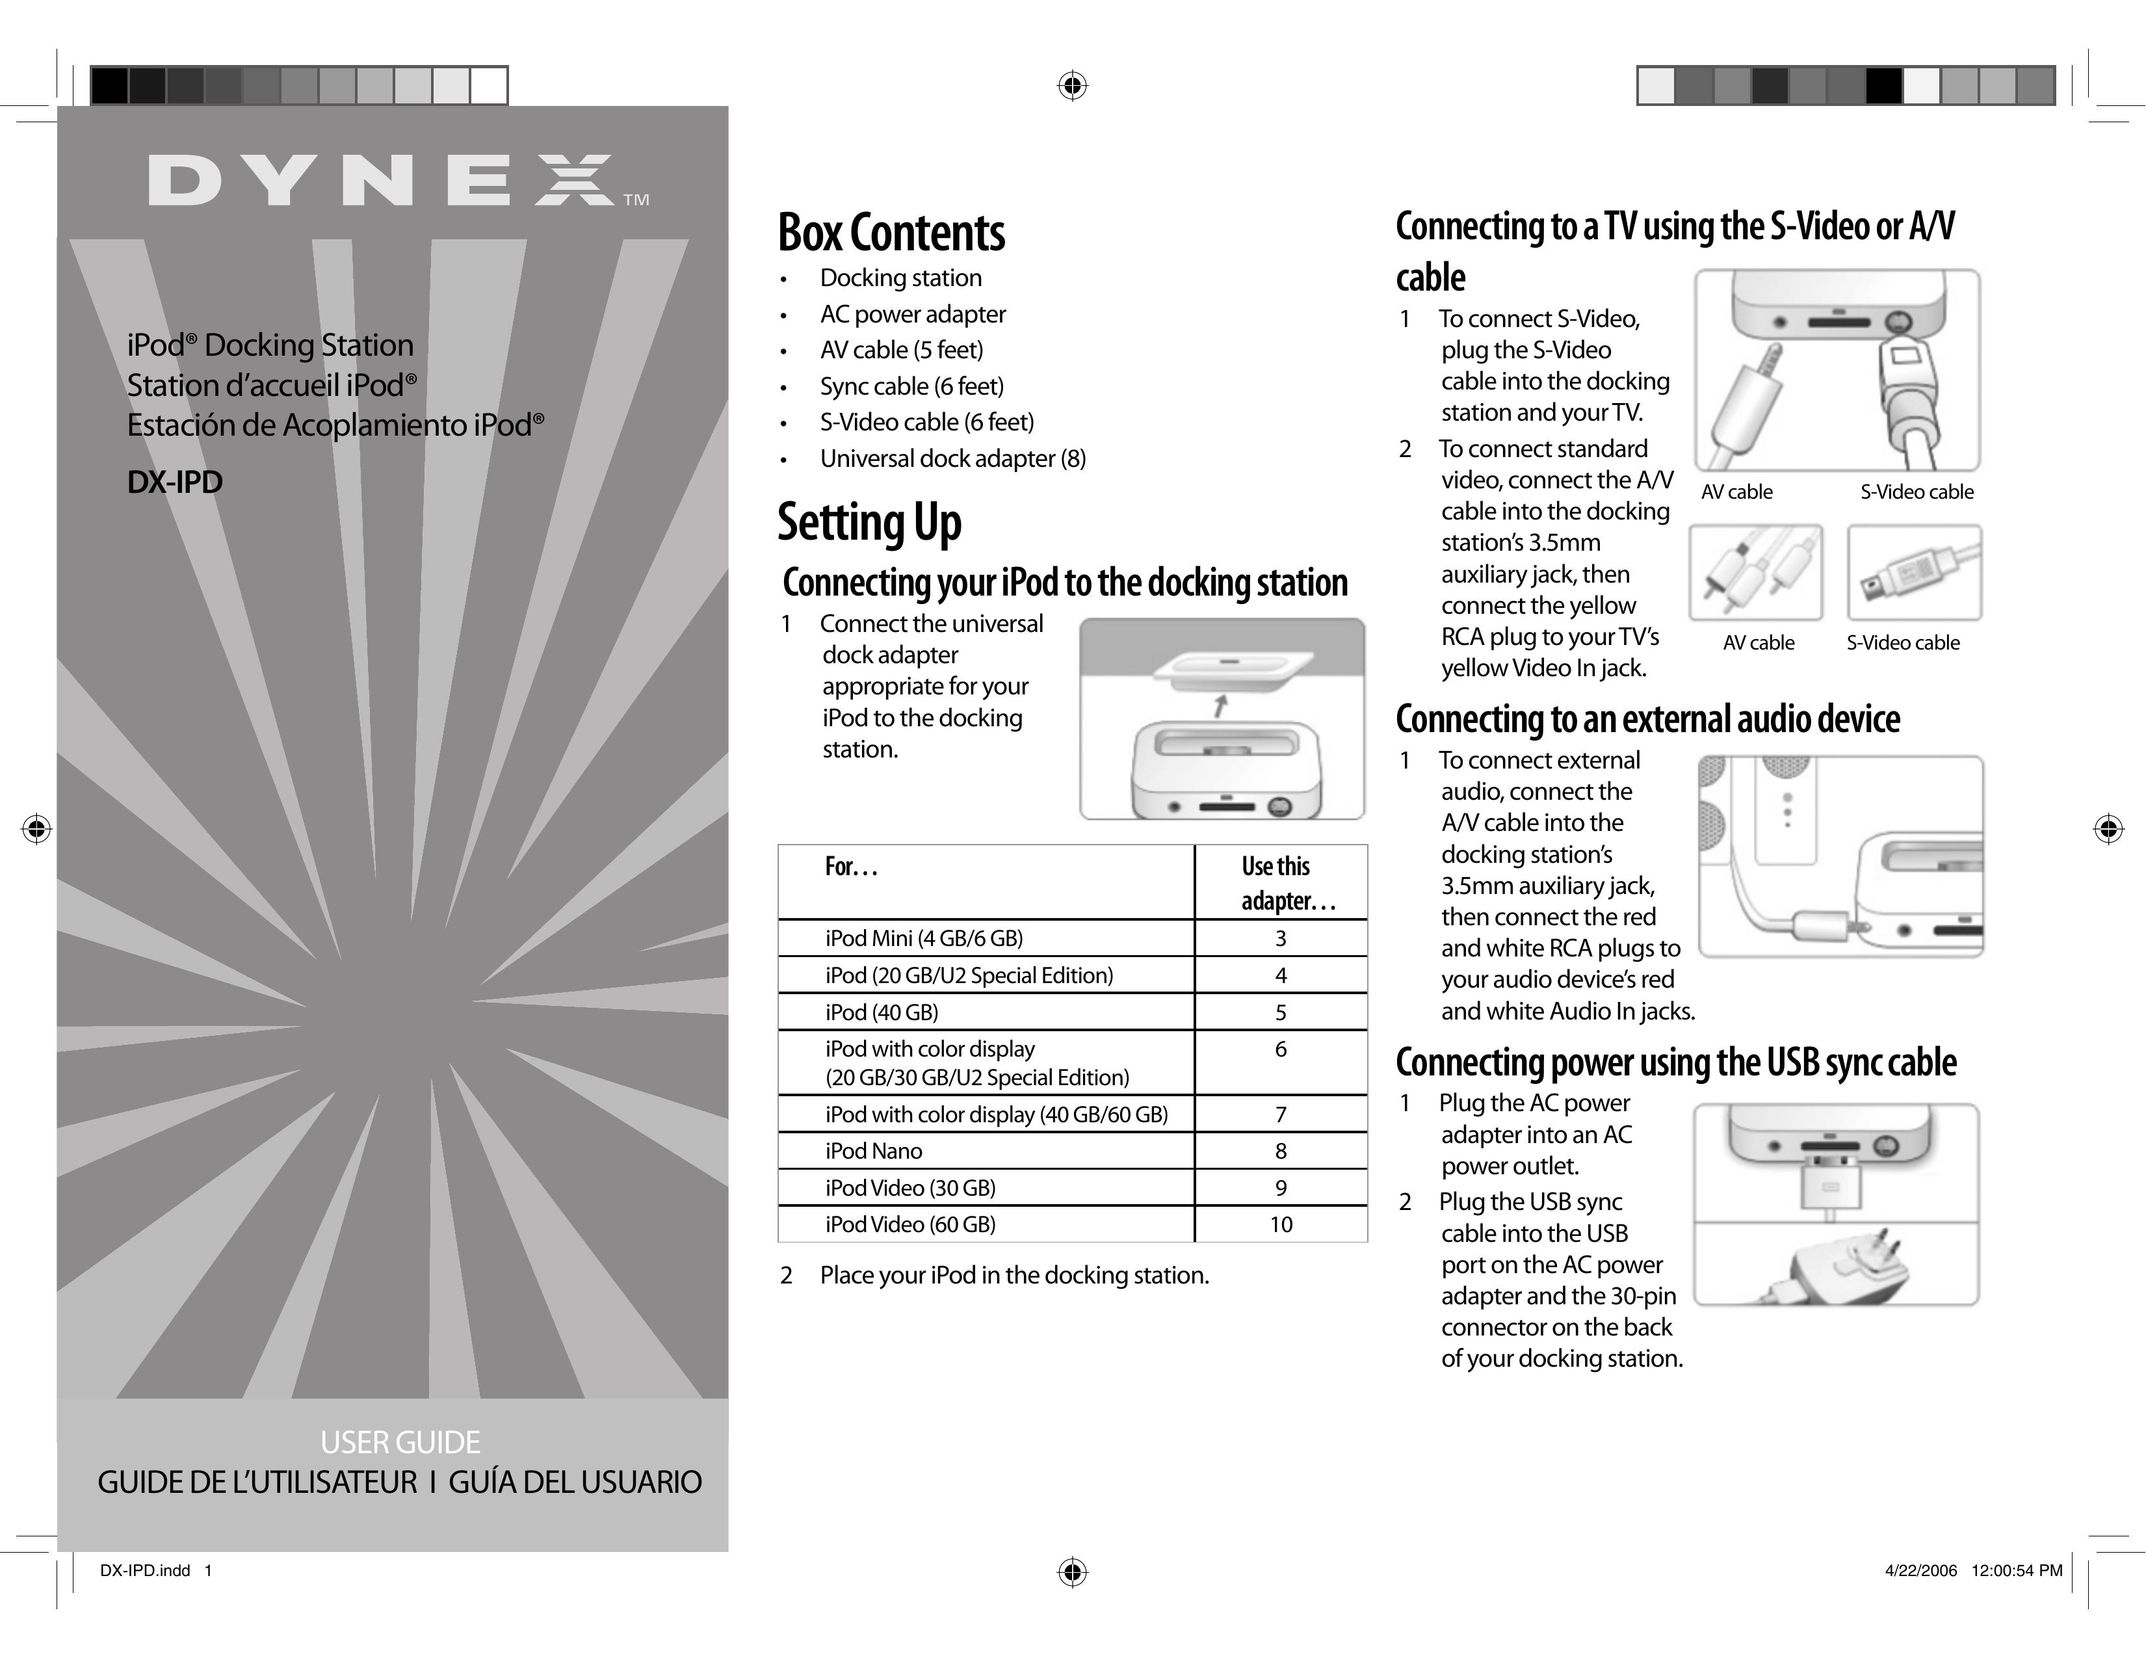 Dynex DX-IPD MP3 Docking Station User Manual (Page 1)